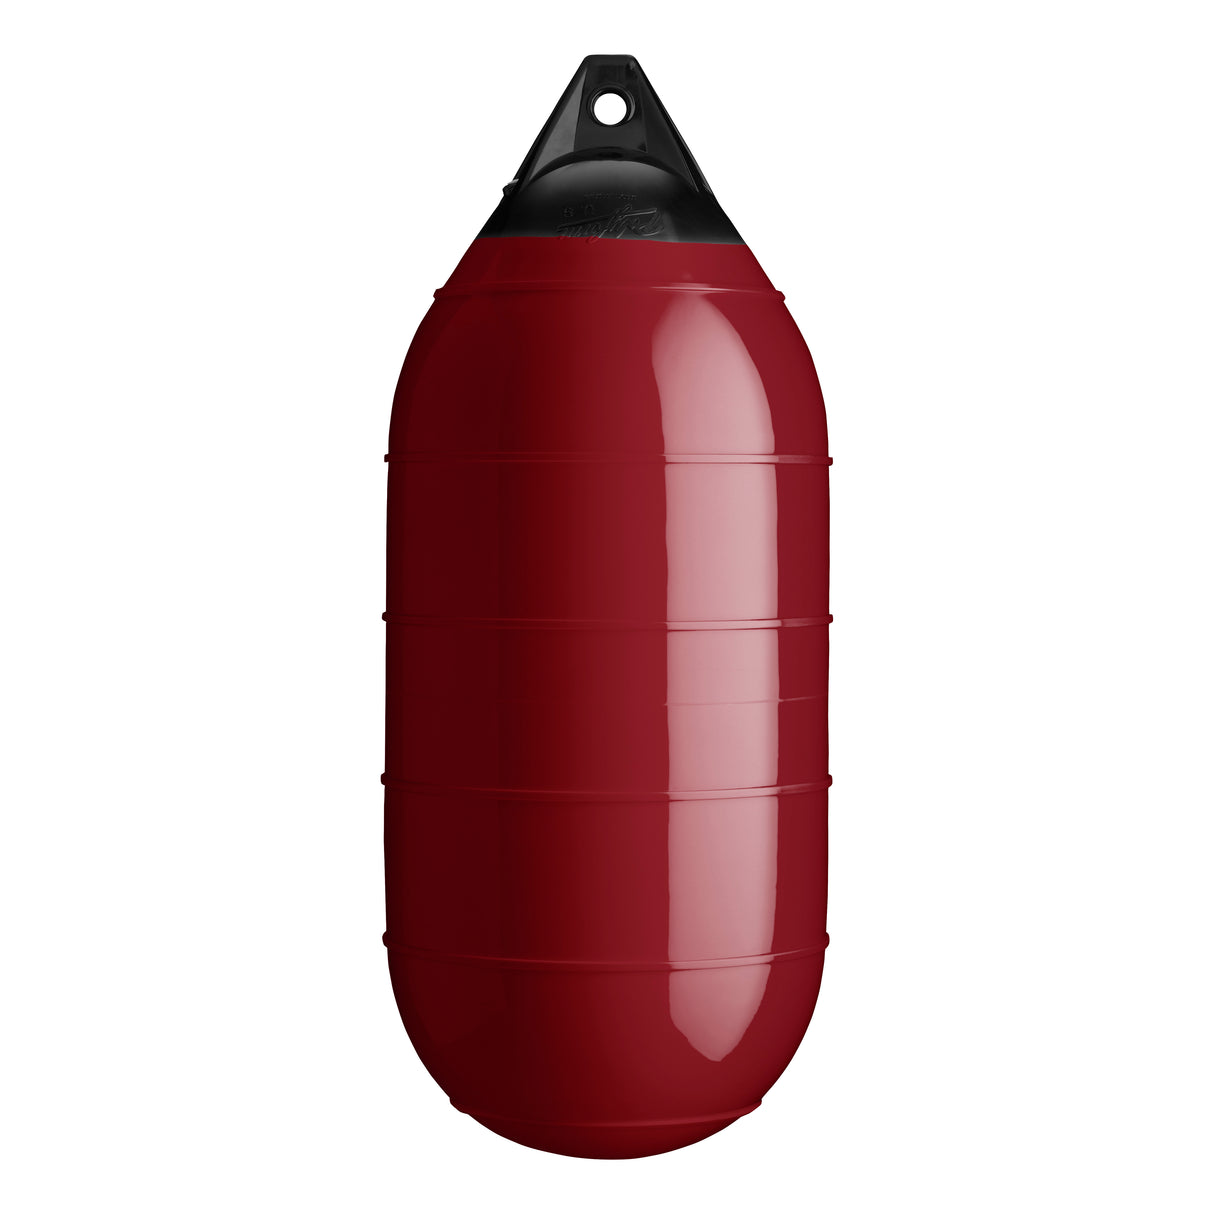 Burgundy low drag buoy with Black-Top, Polyform LD-4 